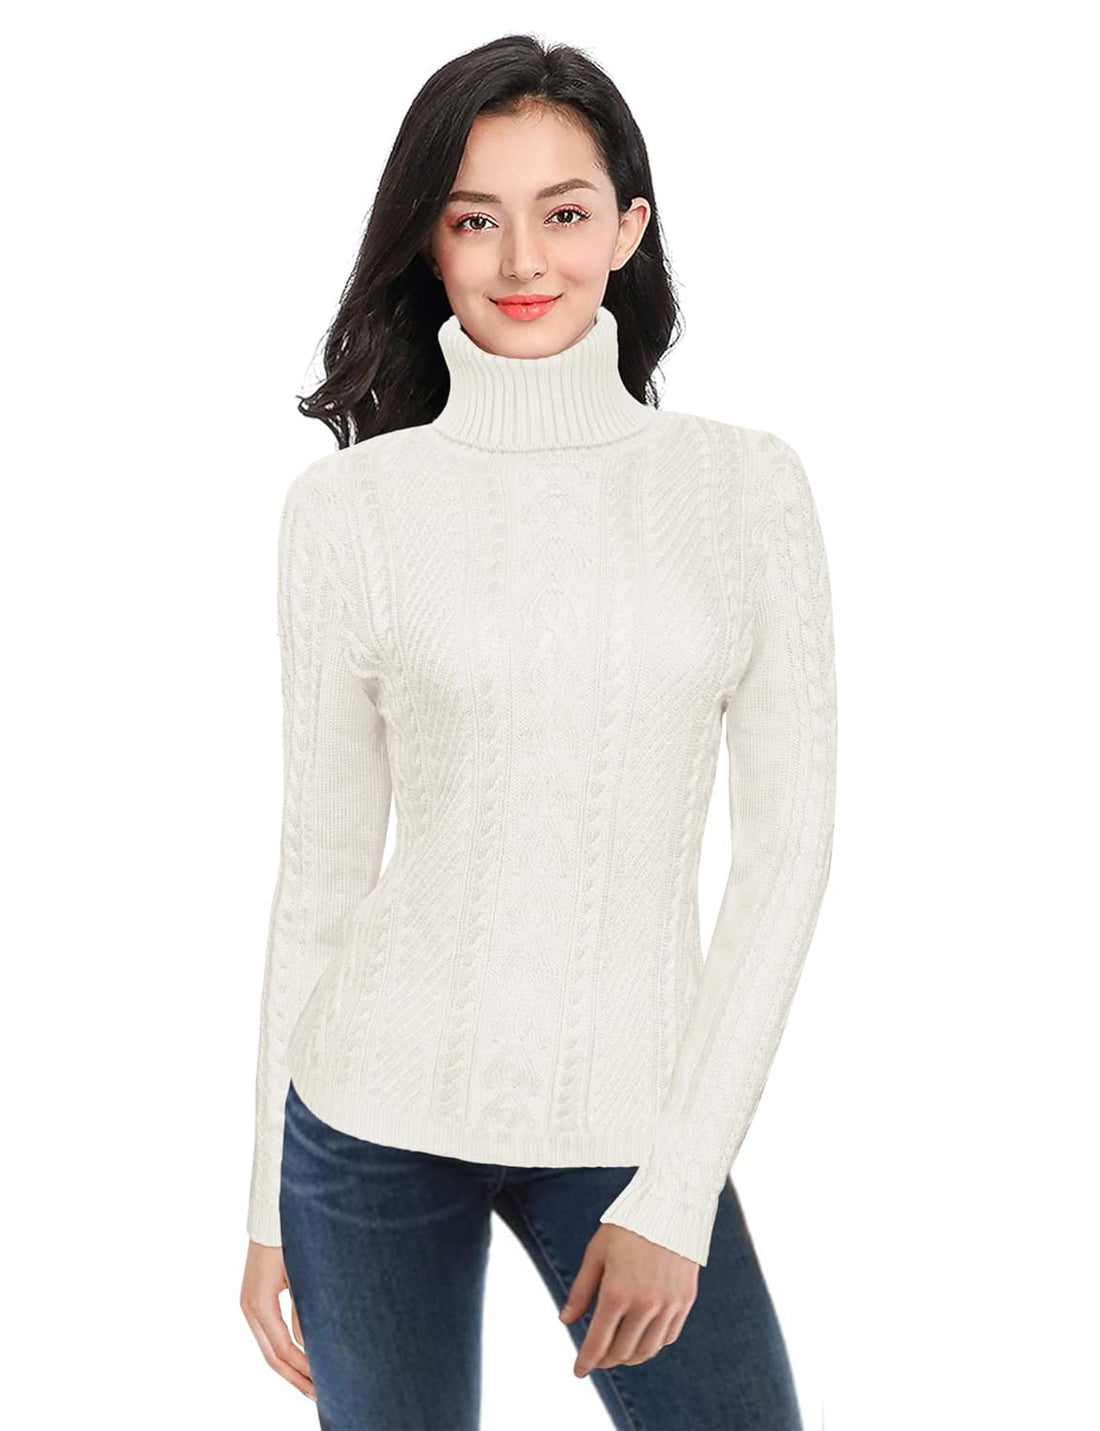 v28 Women Polo Neck Long Slim Fitted Dress Bodycon Turtleneck Cable Knit Sweater, Y White, X-Large